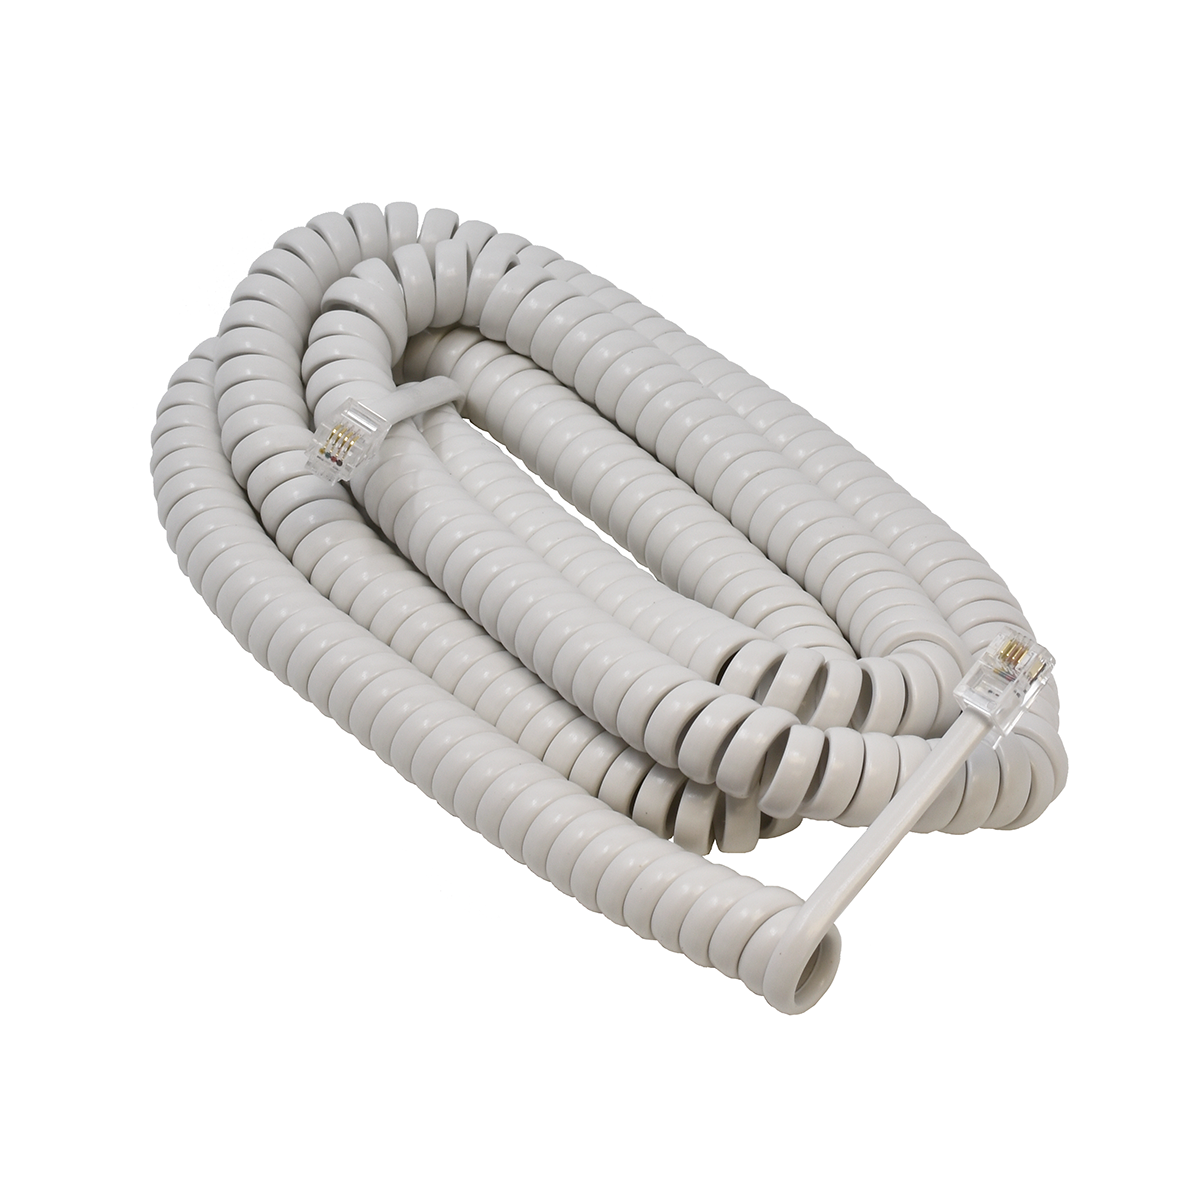 25' White Coiled Handset Cord